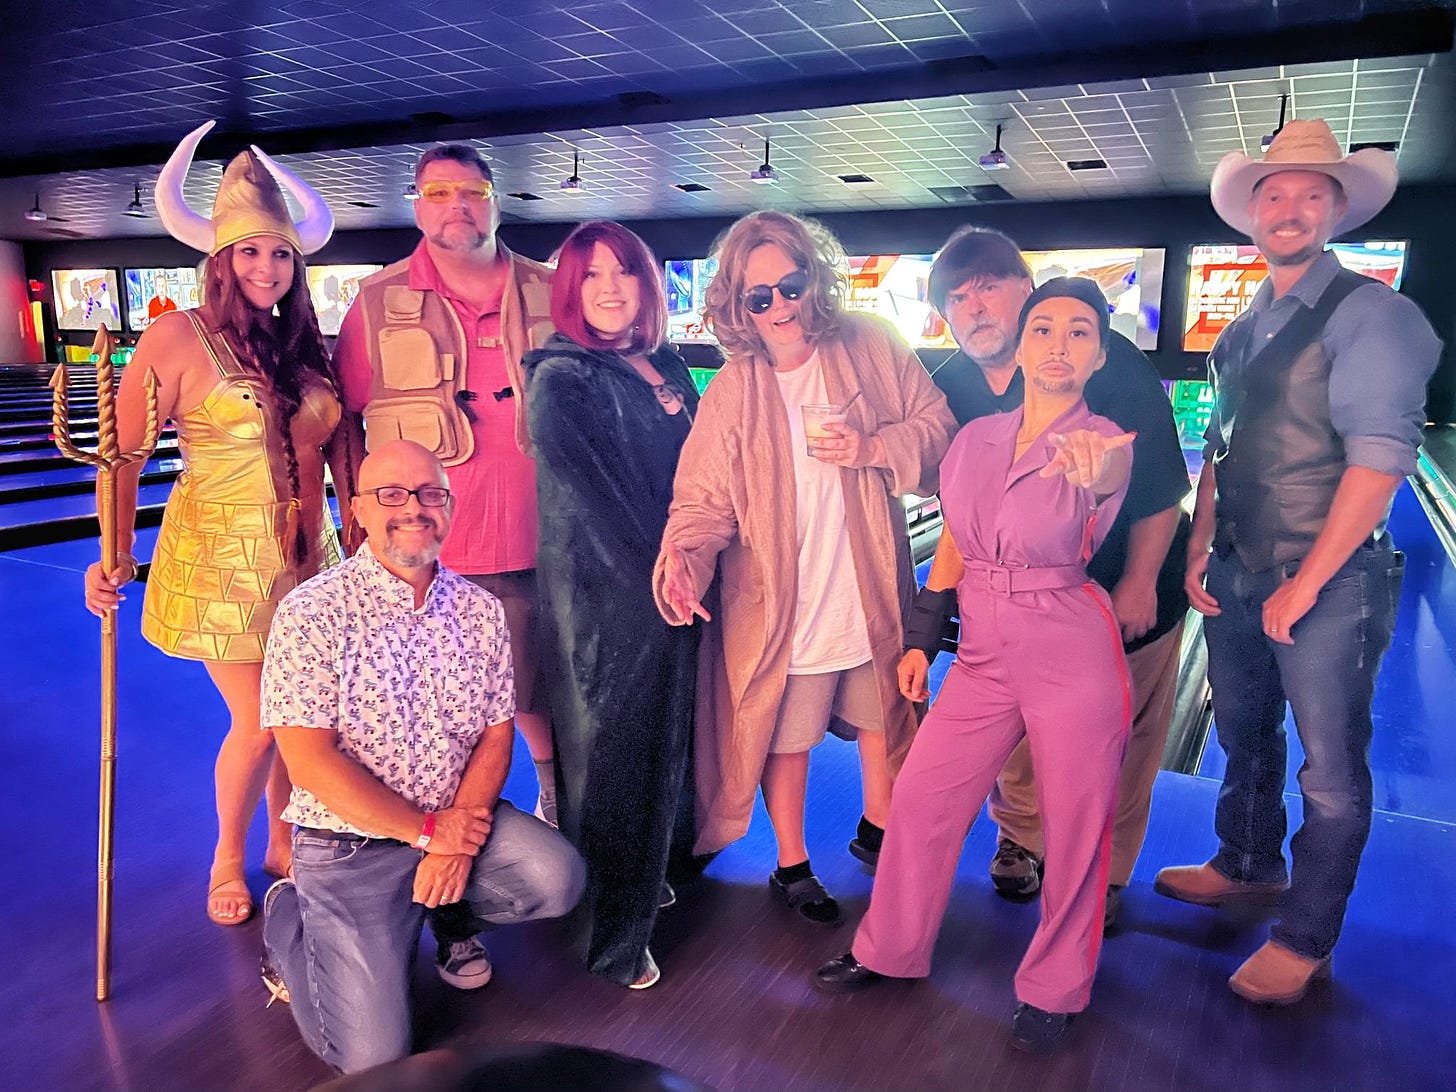 A group of bowlers dressed as characters from "The Big Lebowski"